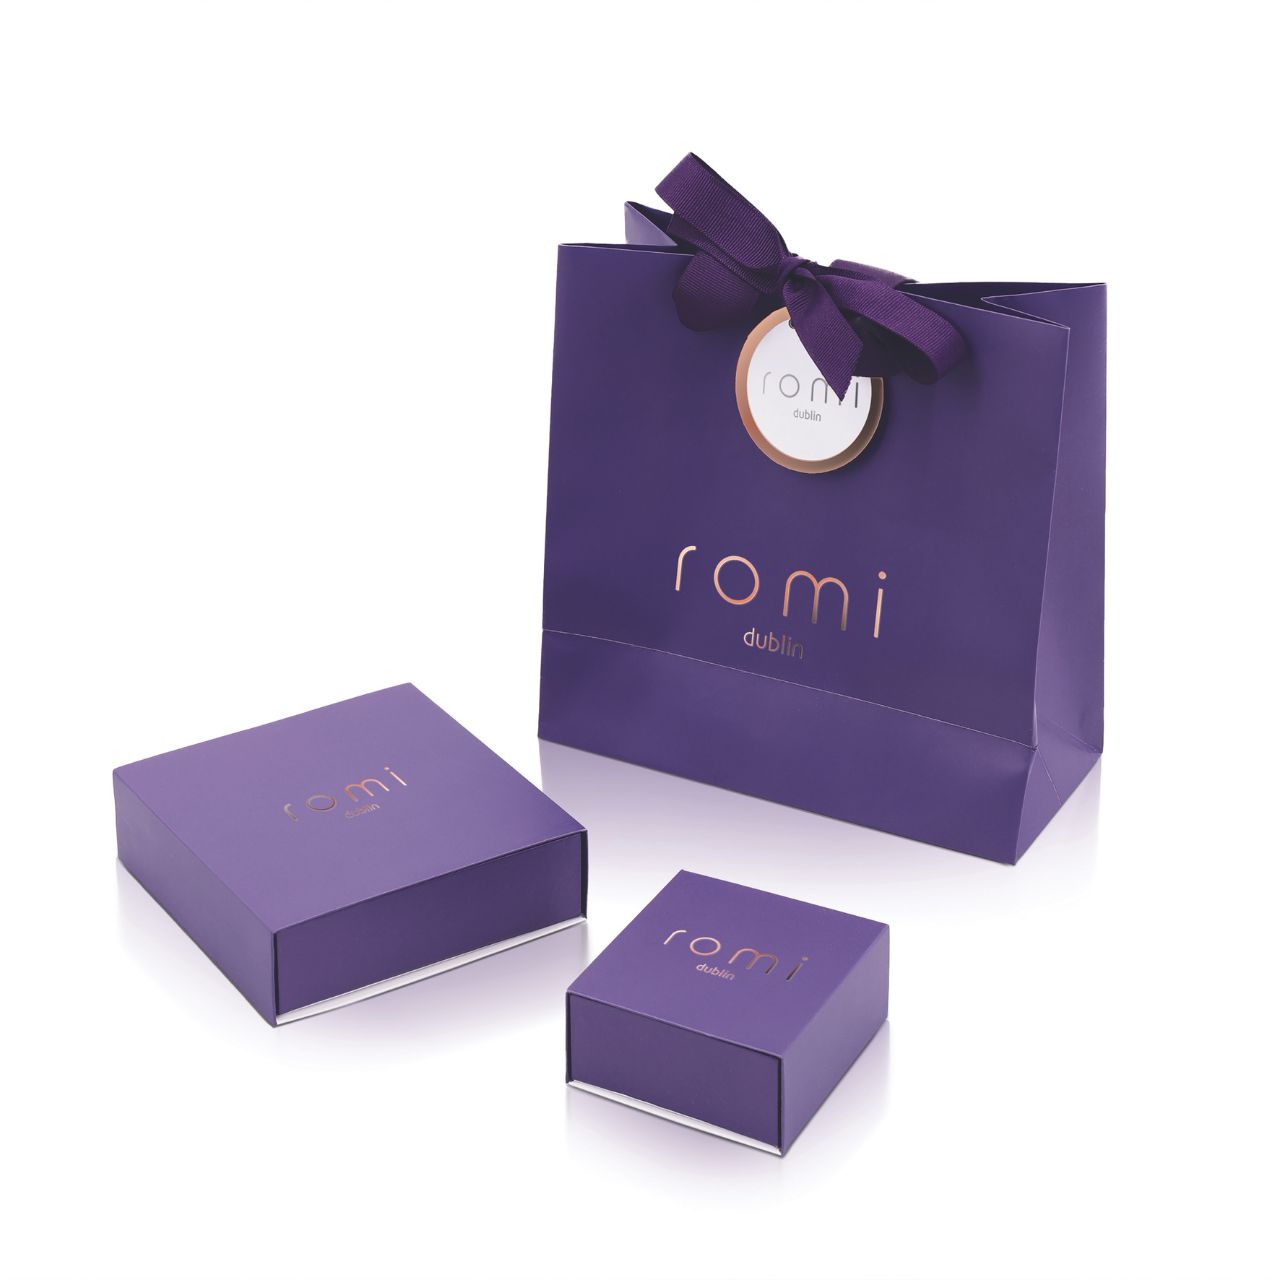 Romi Dublin Pave Disc Drop Earrings  This easy-to-wear jewellery collection was inspired by daughter Romi who loves to style and accessorise. An outfit isn’t complete until the perfect pieces of jewellery and accessories have been selected to enhance it.